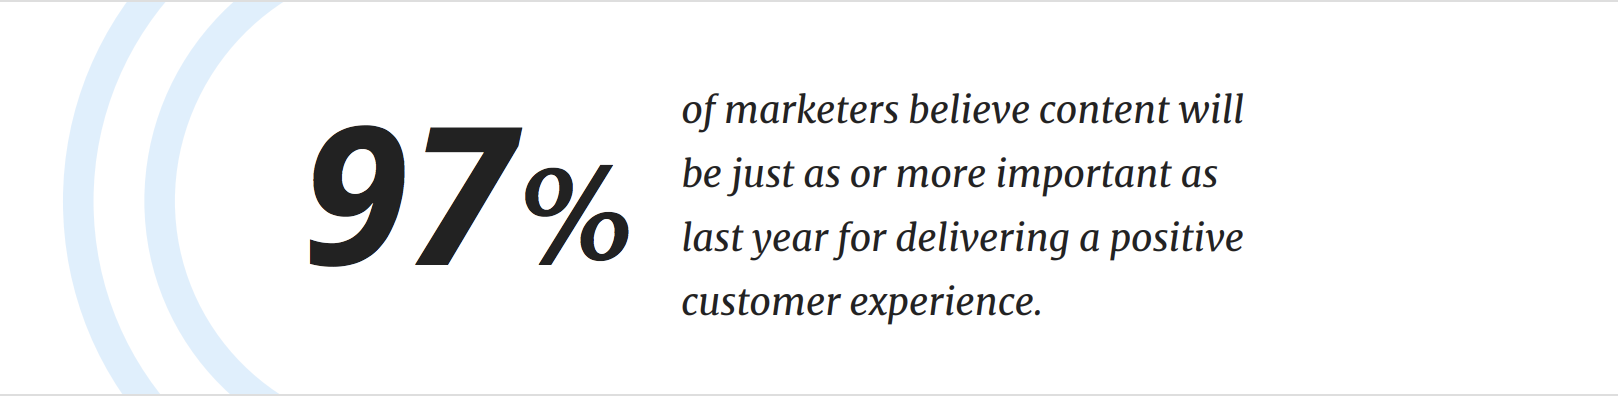 Customer Experience Content Statistic